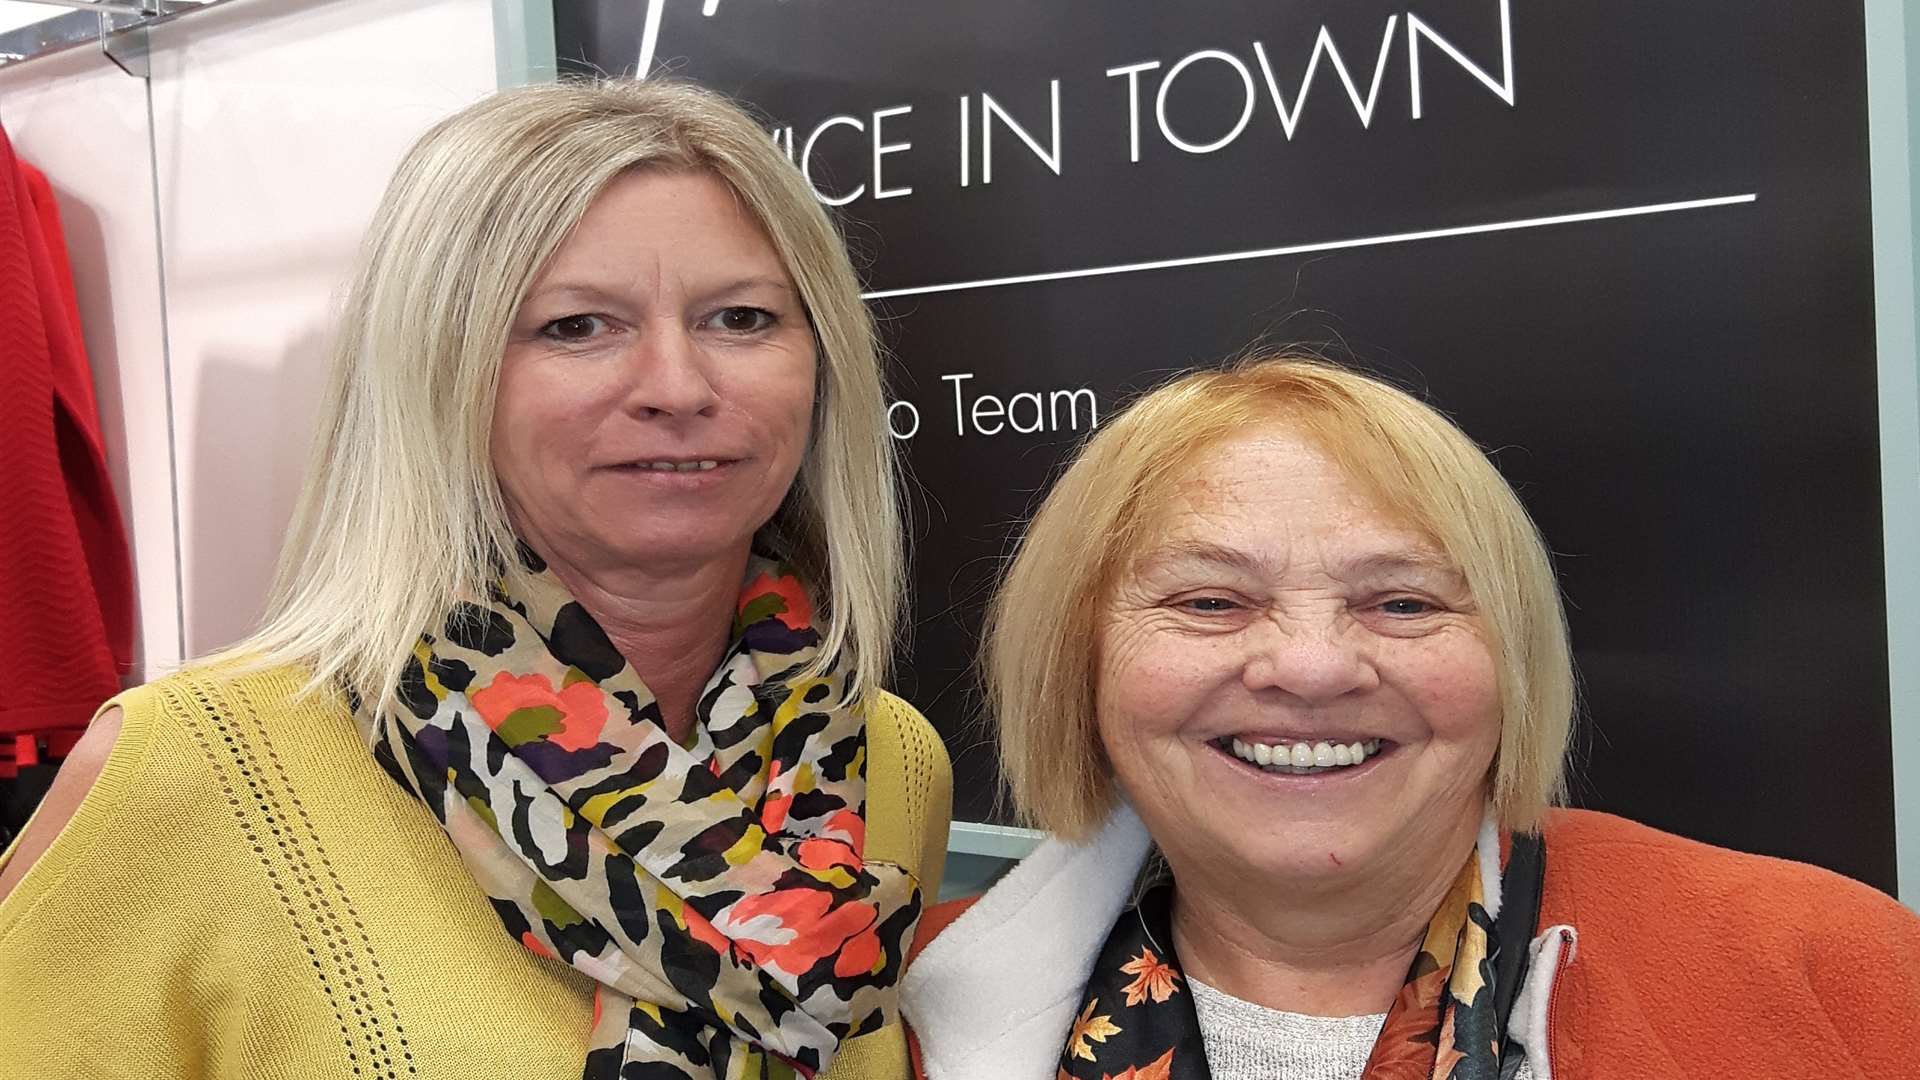 Manager Sue Hewins with loyal customer Catherine Birt